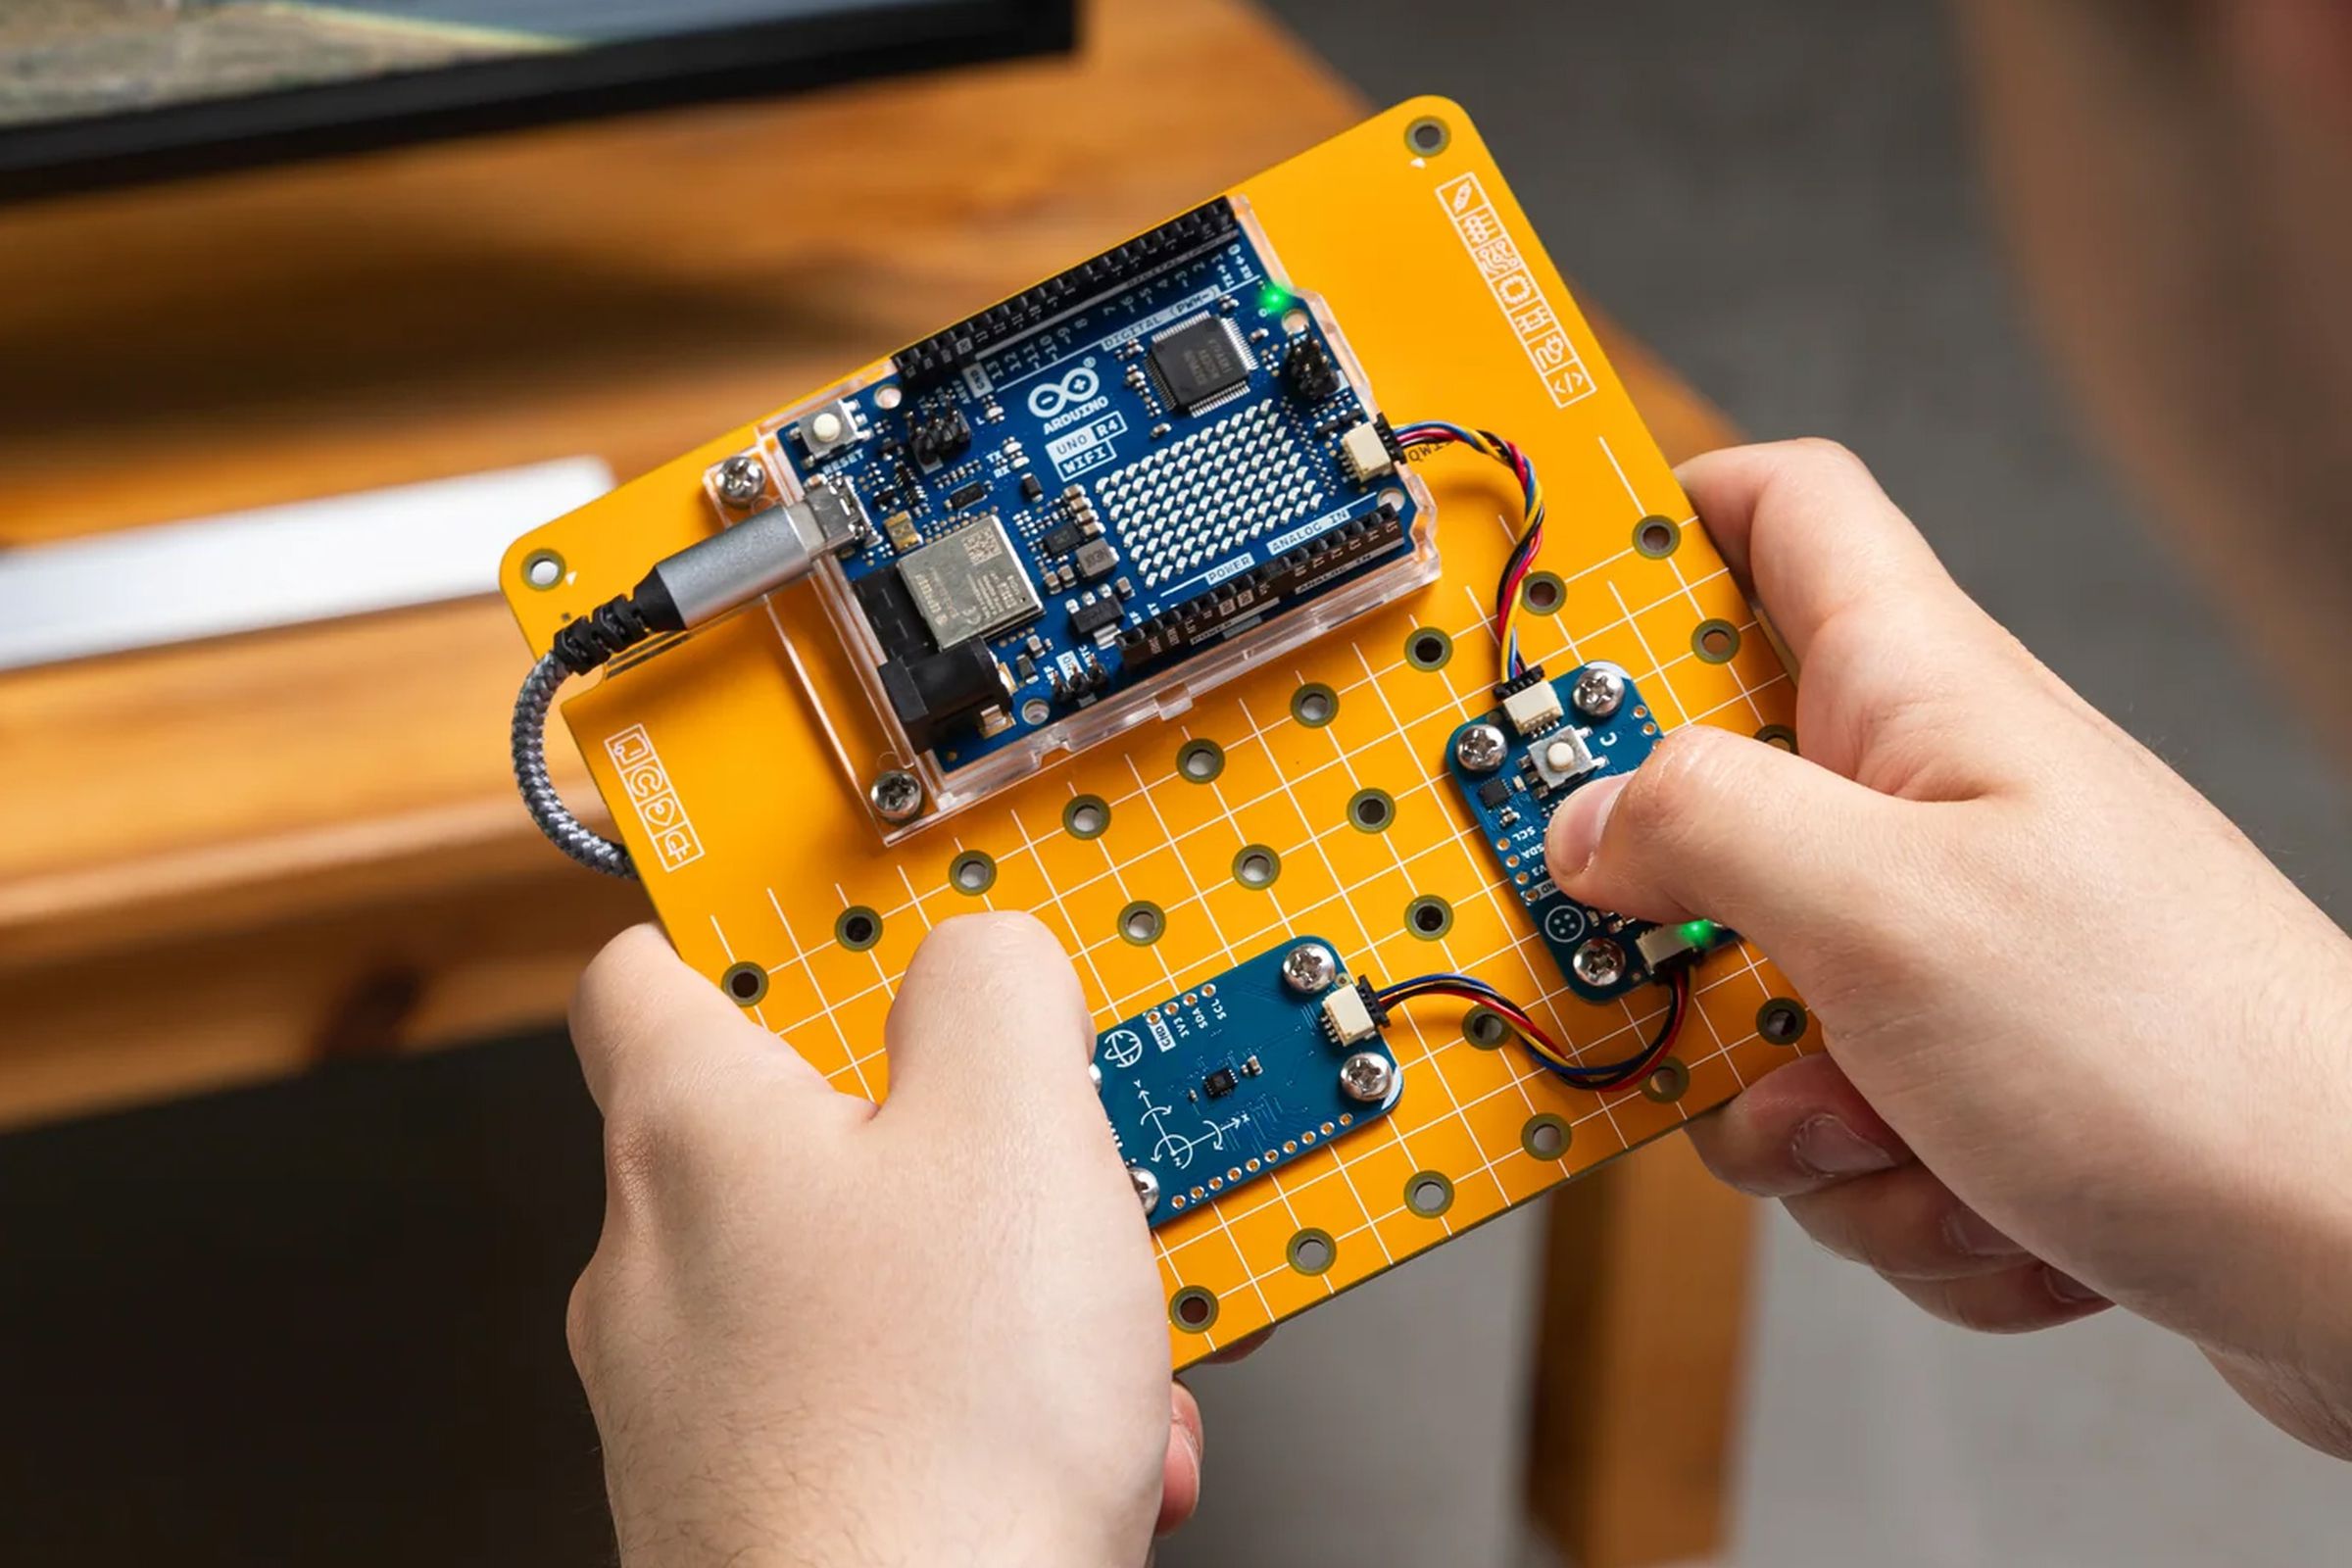 A user plays a video game using a game controller assemble from the Arduino Plug and Make Kit.